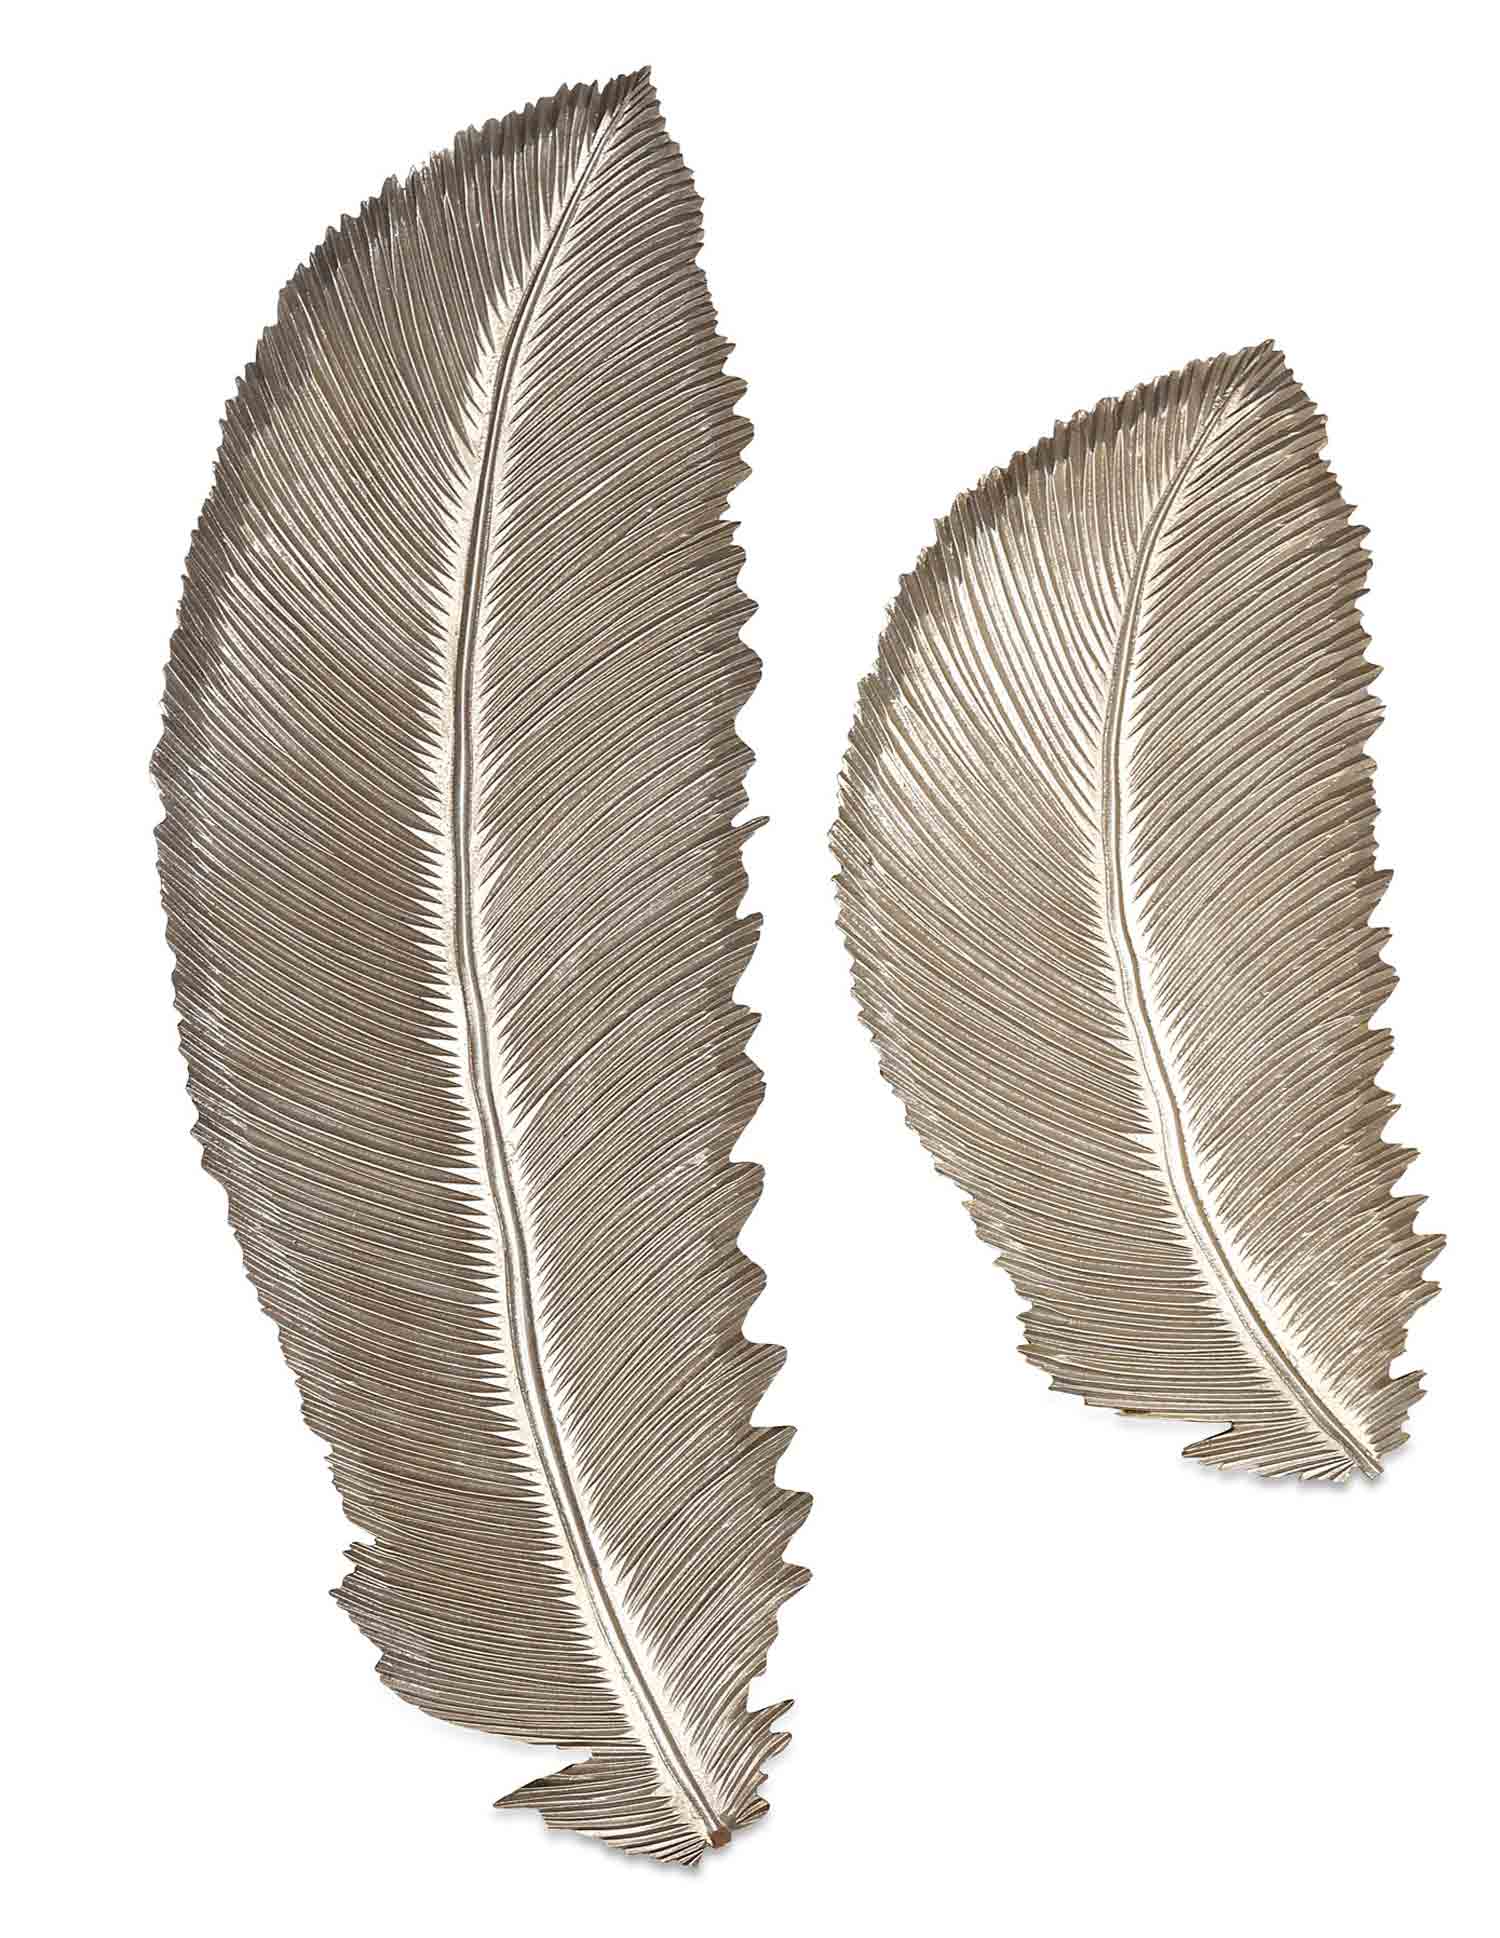 IMAX Eshe Carved Feathers - Set of 2